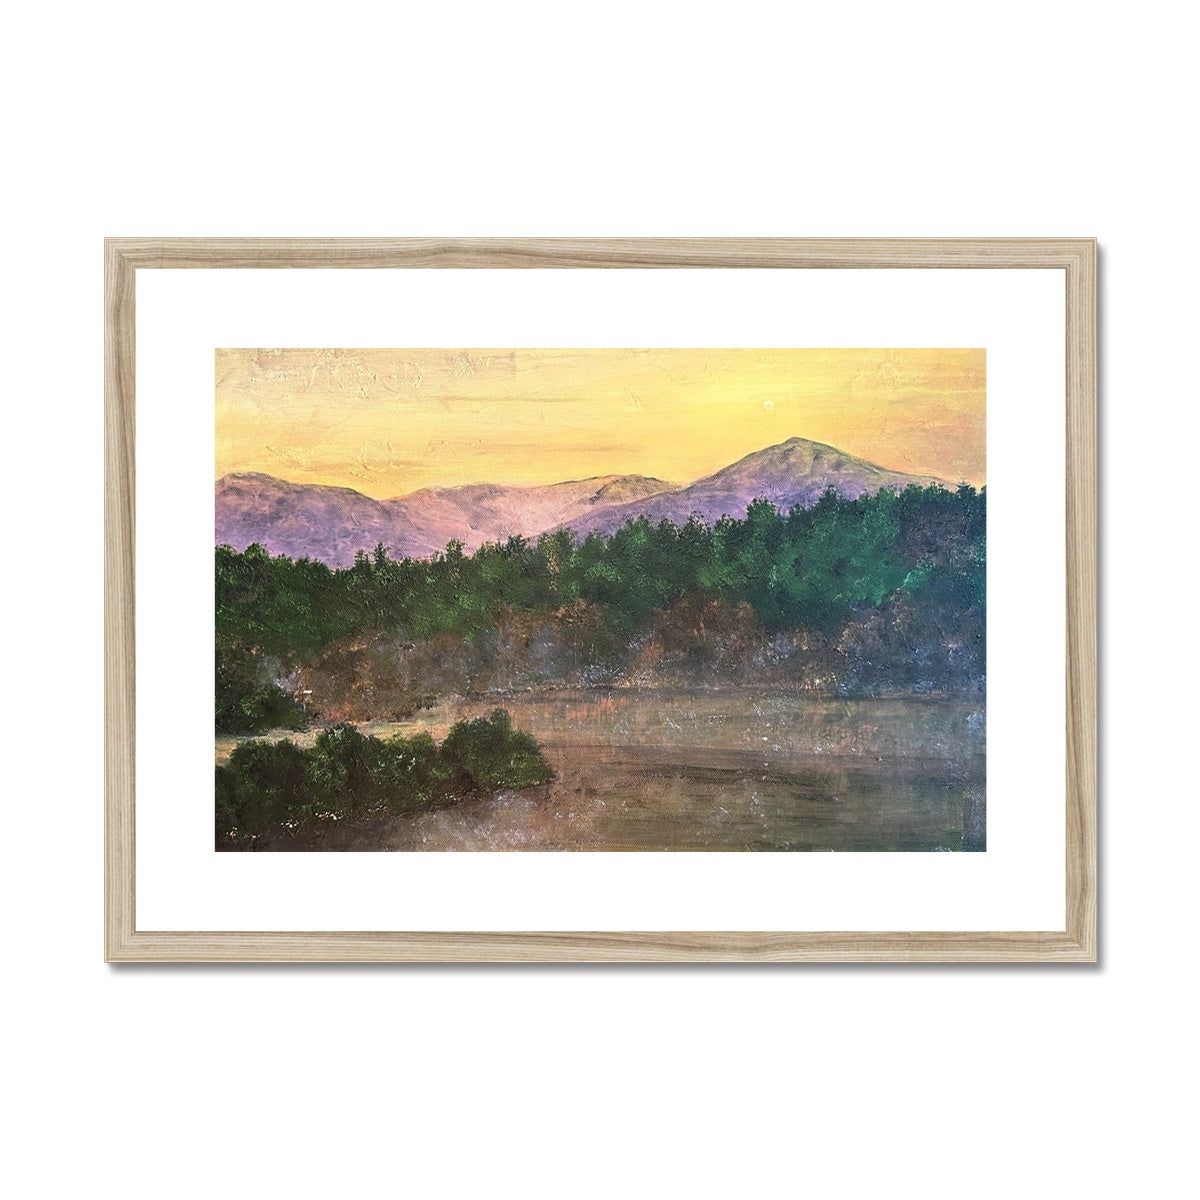 Ben Tee Invergarry Painting | Framed & Mounted Prints From Scotland-Framed & Mounted Prints-Scottish Lochs & Mountains Art Gallery-A2 Landscape-Natural Frame-Paintings, Prints, Homeware, Art Gifts From Scotland By Scottish Artist Kevin Hunter